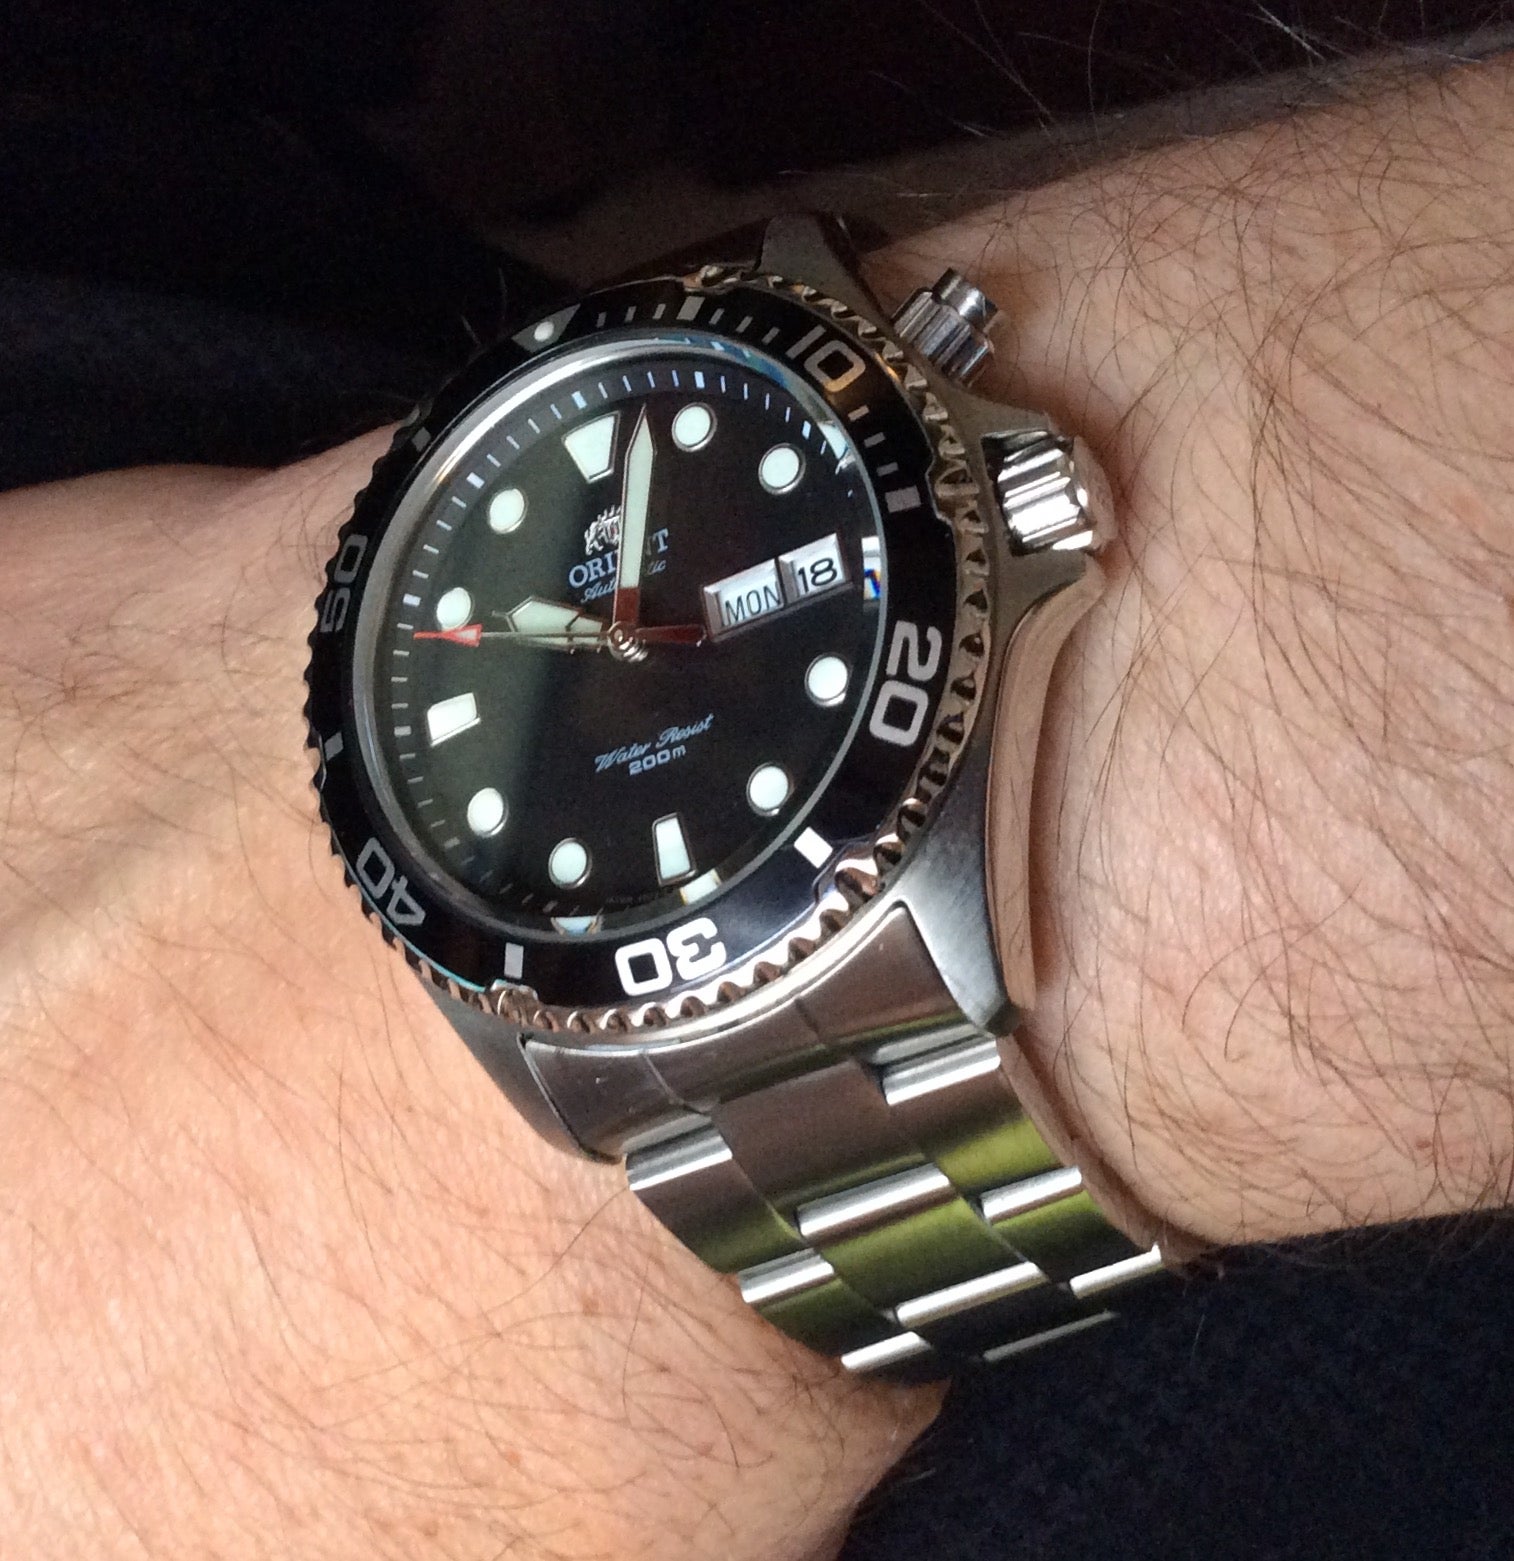 Show off your Mako/Rays | Page 7 | WatchUSeek Watch Forums